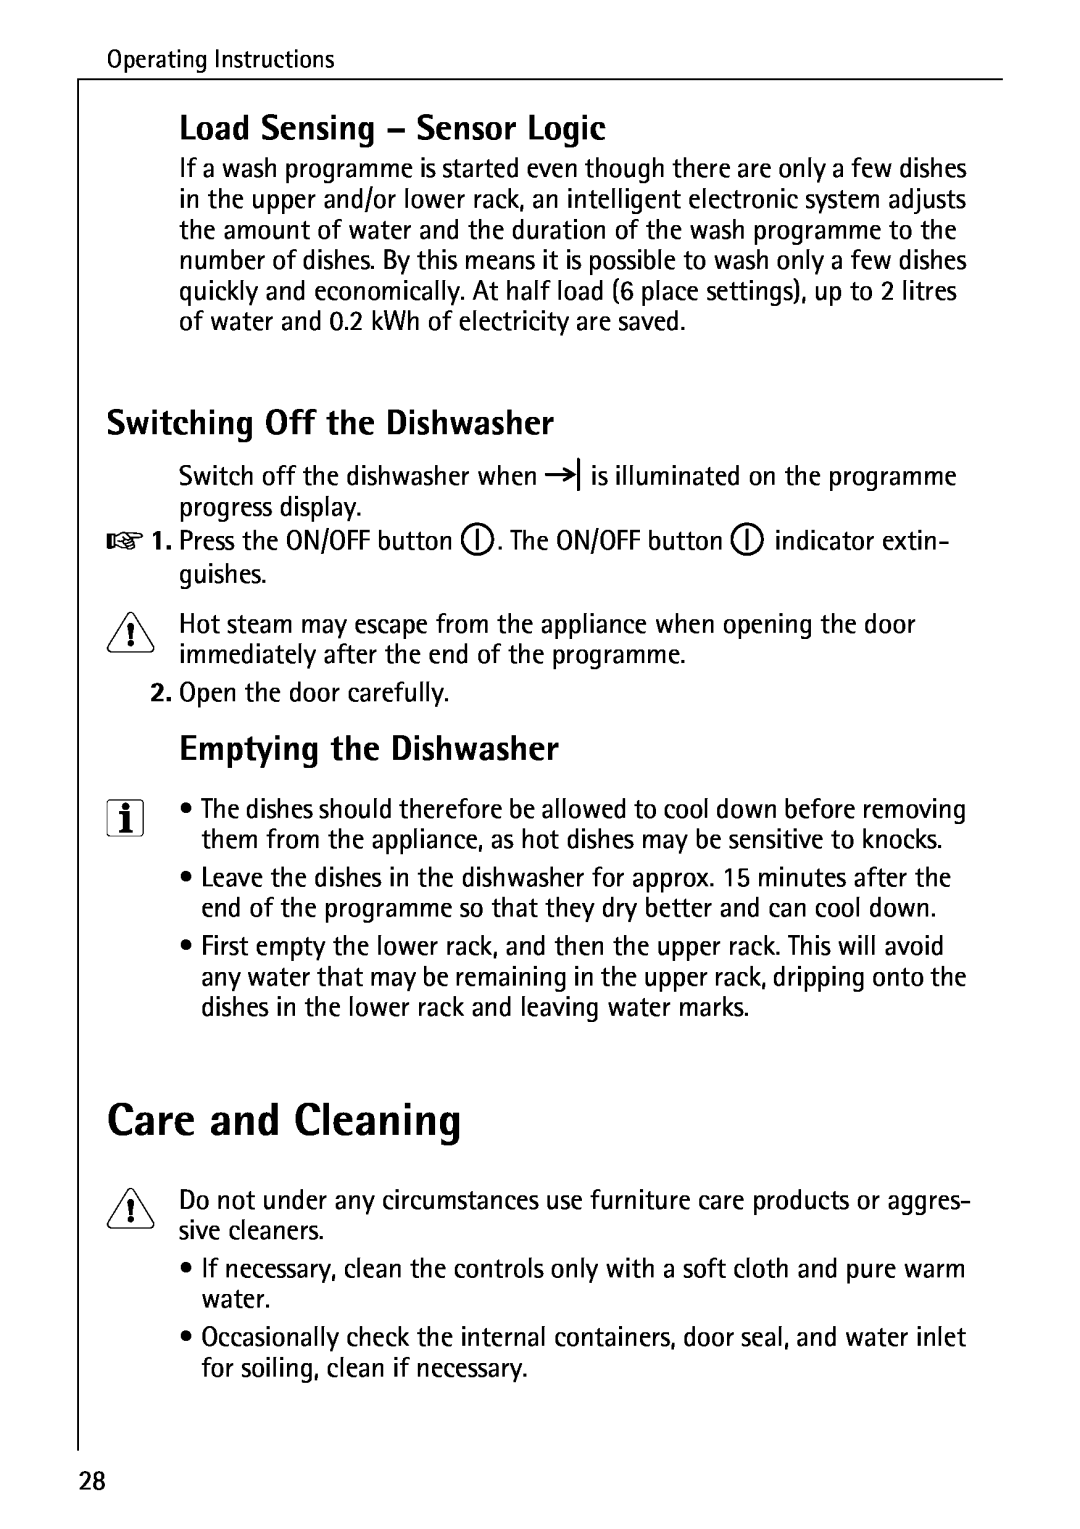 Electrolux FAVORIT 40630 manual Care and Cleaning, Load Sensing - Sensor Logic, Switching Off the Dishwasher 